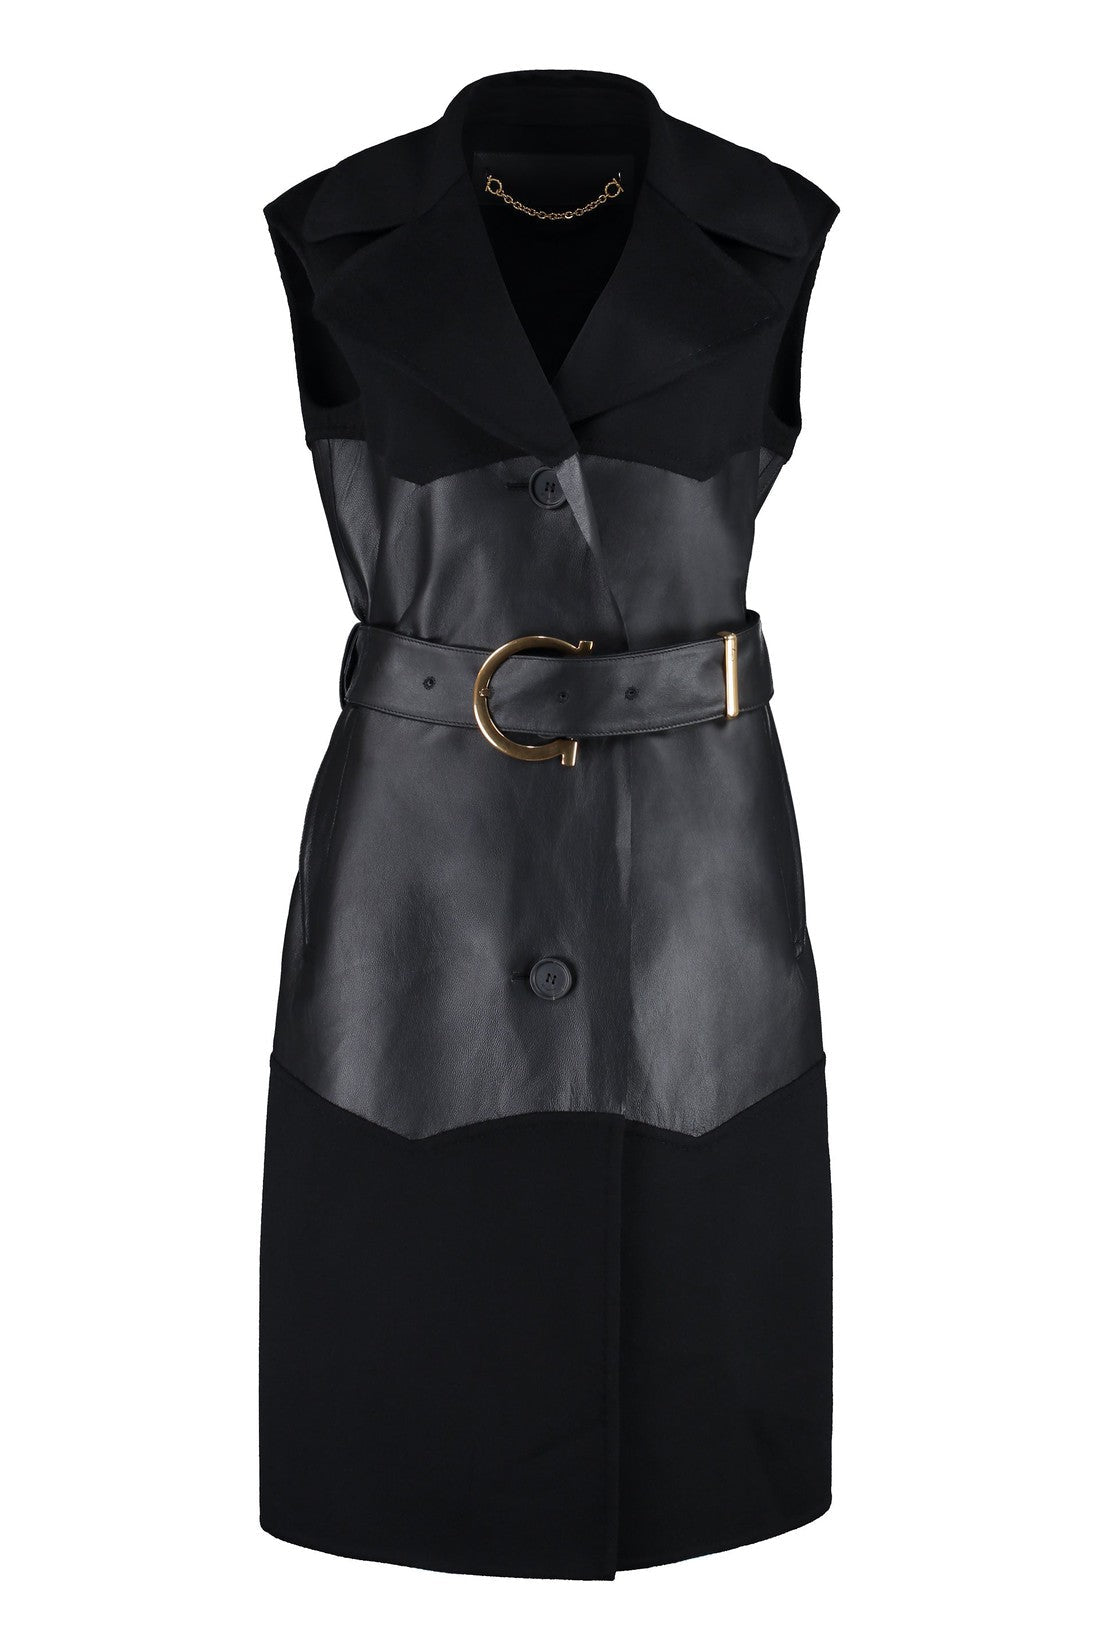 FERRAGAMO-OUTLET-SALE-Wool and cashmere sleeveless coat-ARCHIVIST